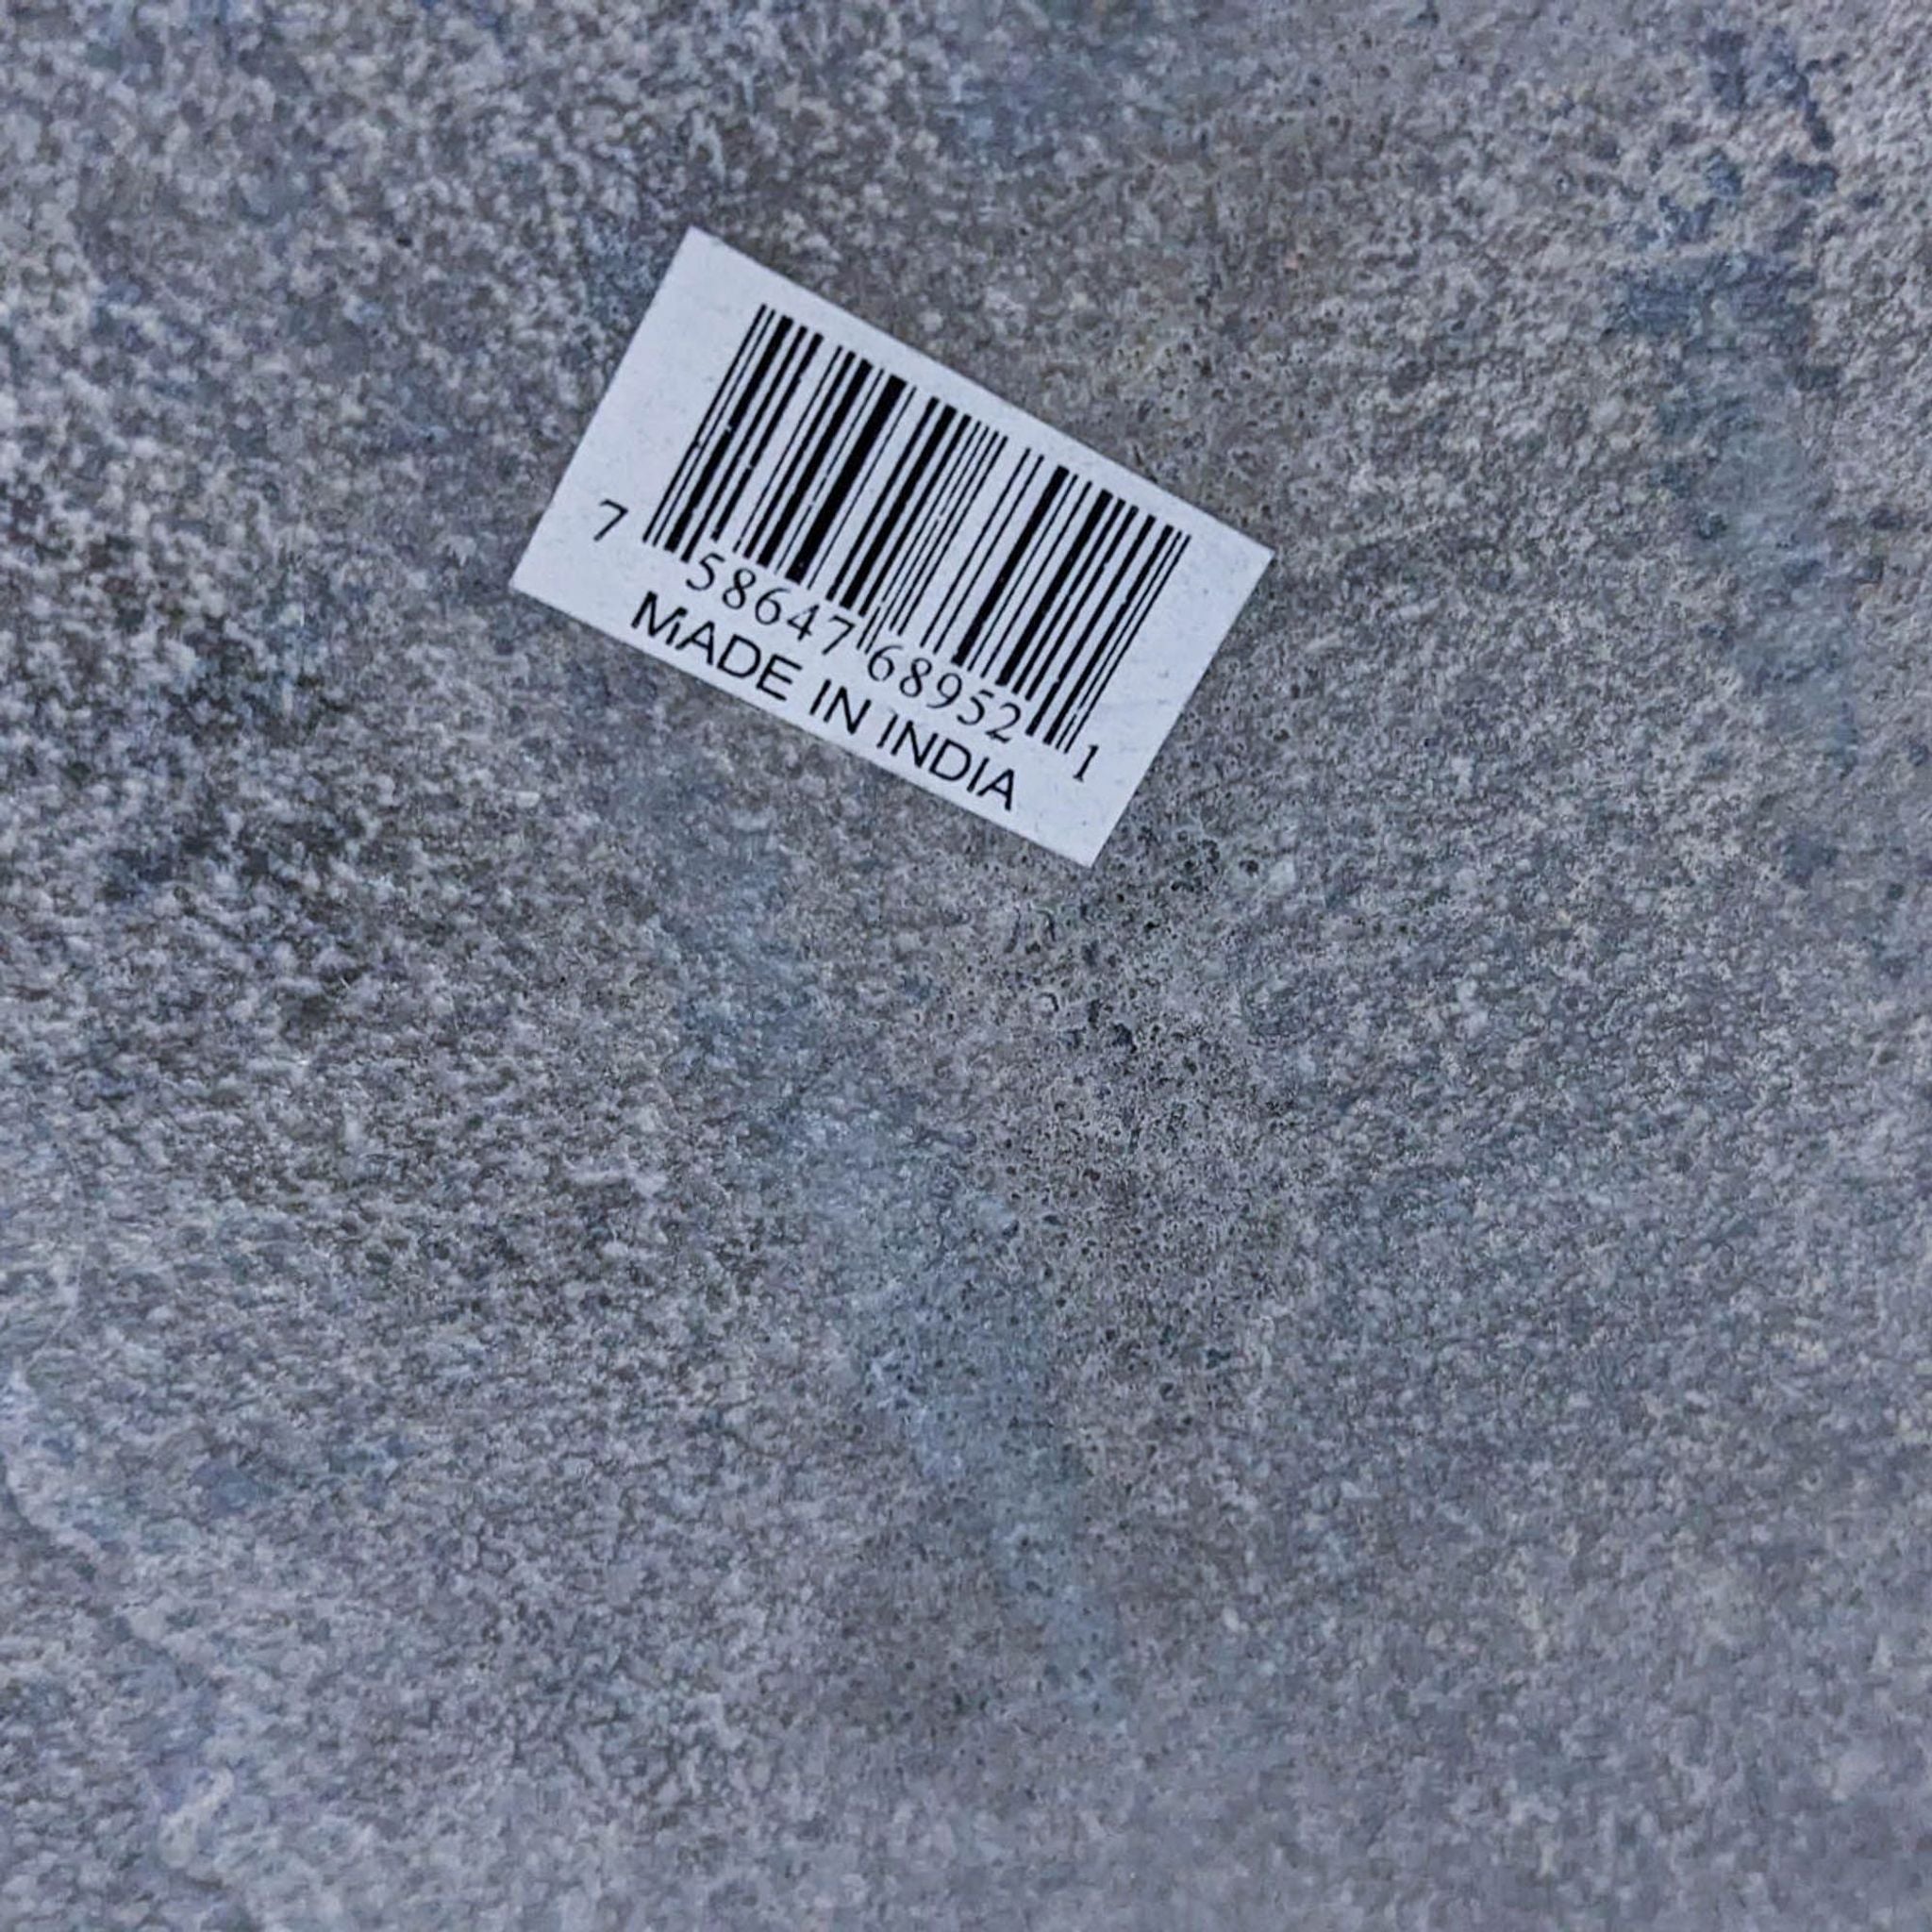 Close-up of a label on the Reperch end table's metallic surface stating "Made in India" with a barcode above the text.